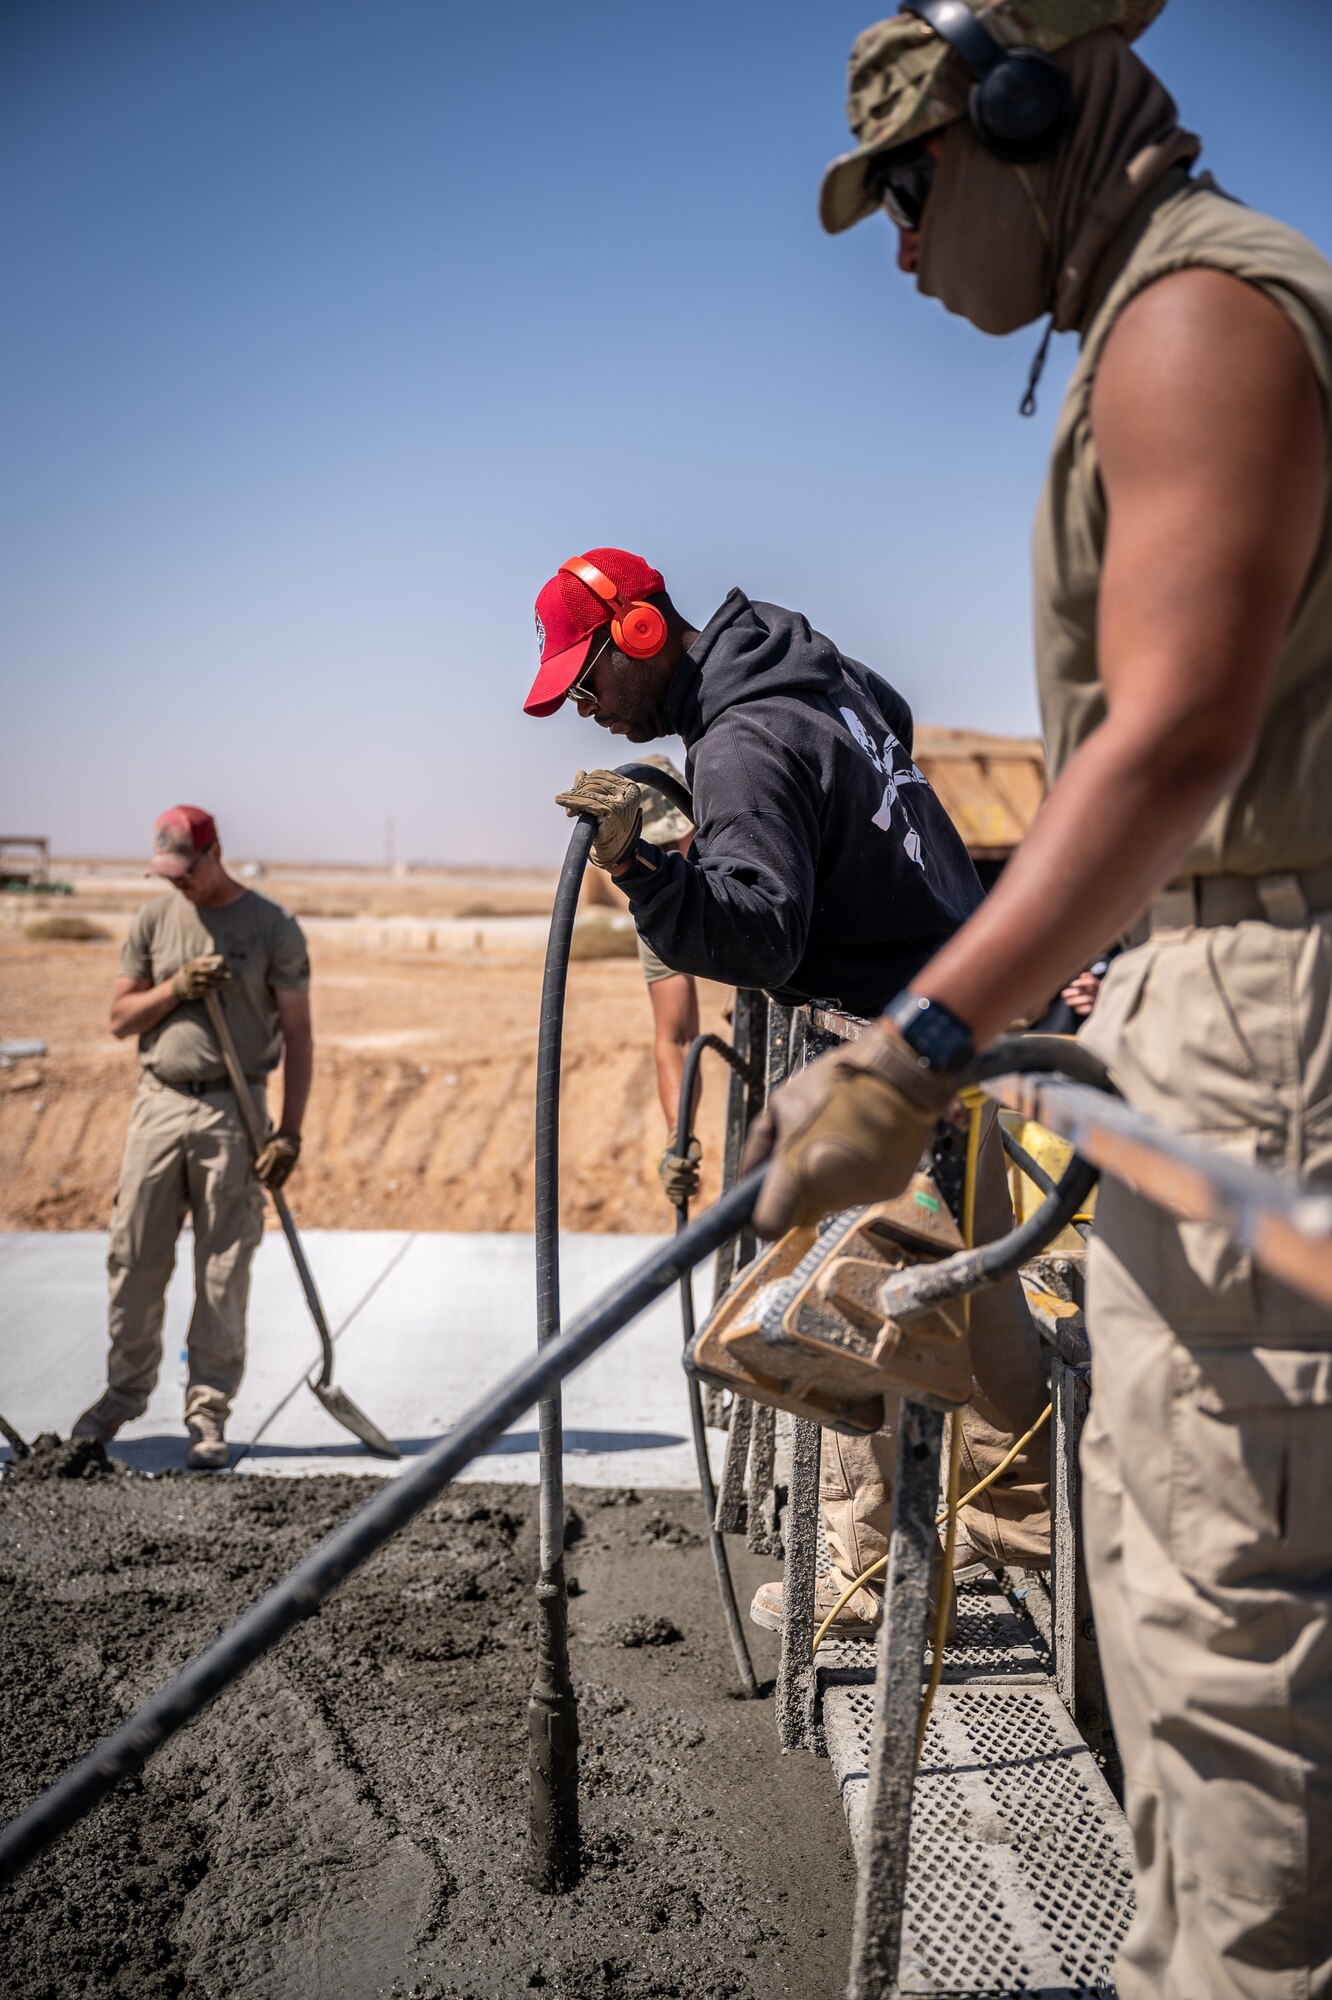 Tech. Sgt. Meshach Barker and Tech. Sgt. Max Silva, 1st Expeditionary Civil Engineer Group pavements and construction equipment operator craftsmen, stand on a roller screed to vibrate concrete as it is placed during a runway overrun repair project at an undisclosed location in Southwest Asia, April 14, 2022. Vibrating concrete consolidates and eliminates air pockets present in a freshly poured concrete pad. (U.S. Air Force photo by Master Sgt. Christopher Parr)